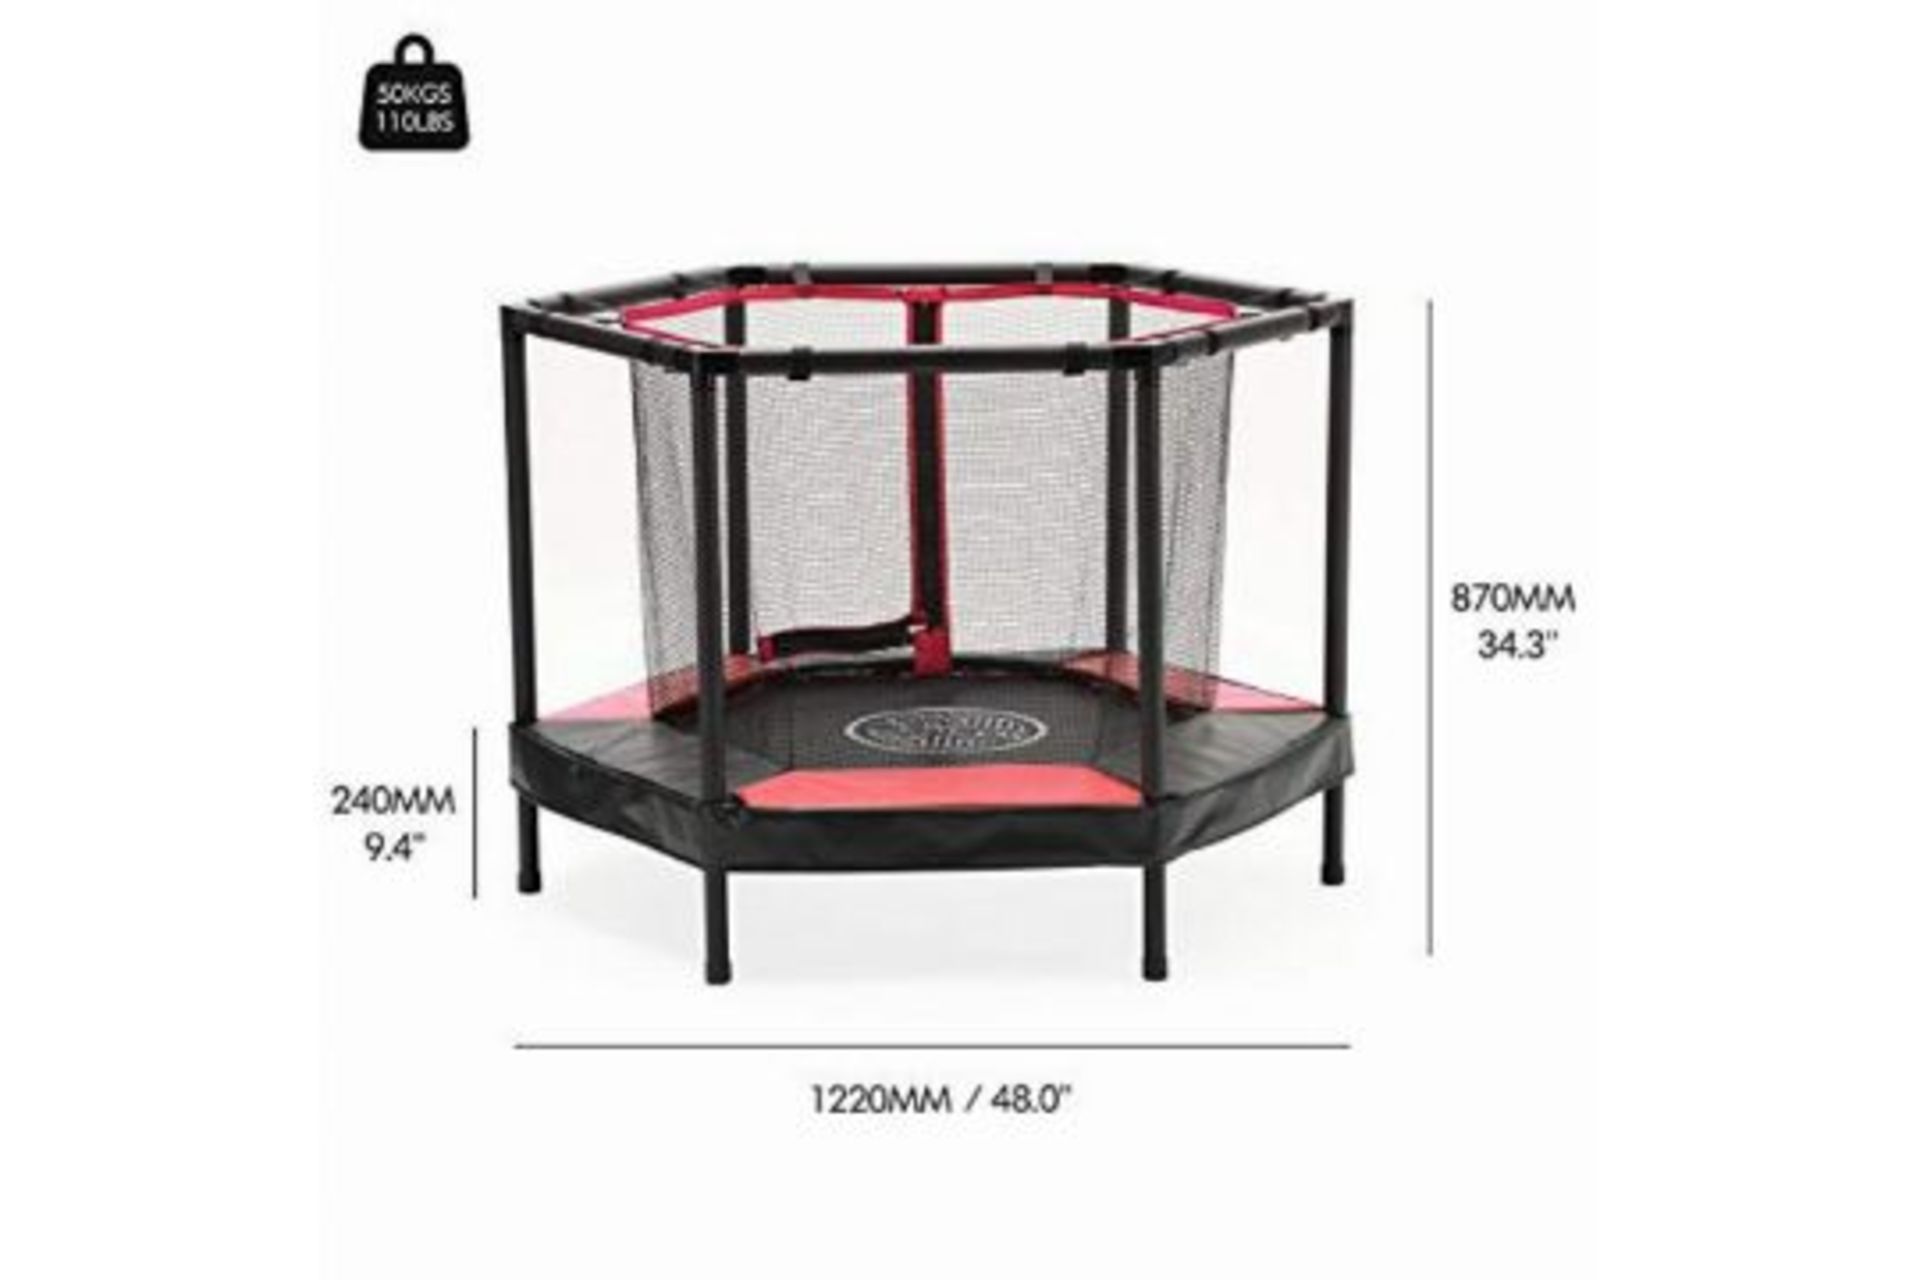 4 x brand new Kids Trampoline 4Ft Mini Trampolines with Enclosure Net and Safety Pad - Small Toddler